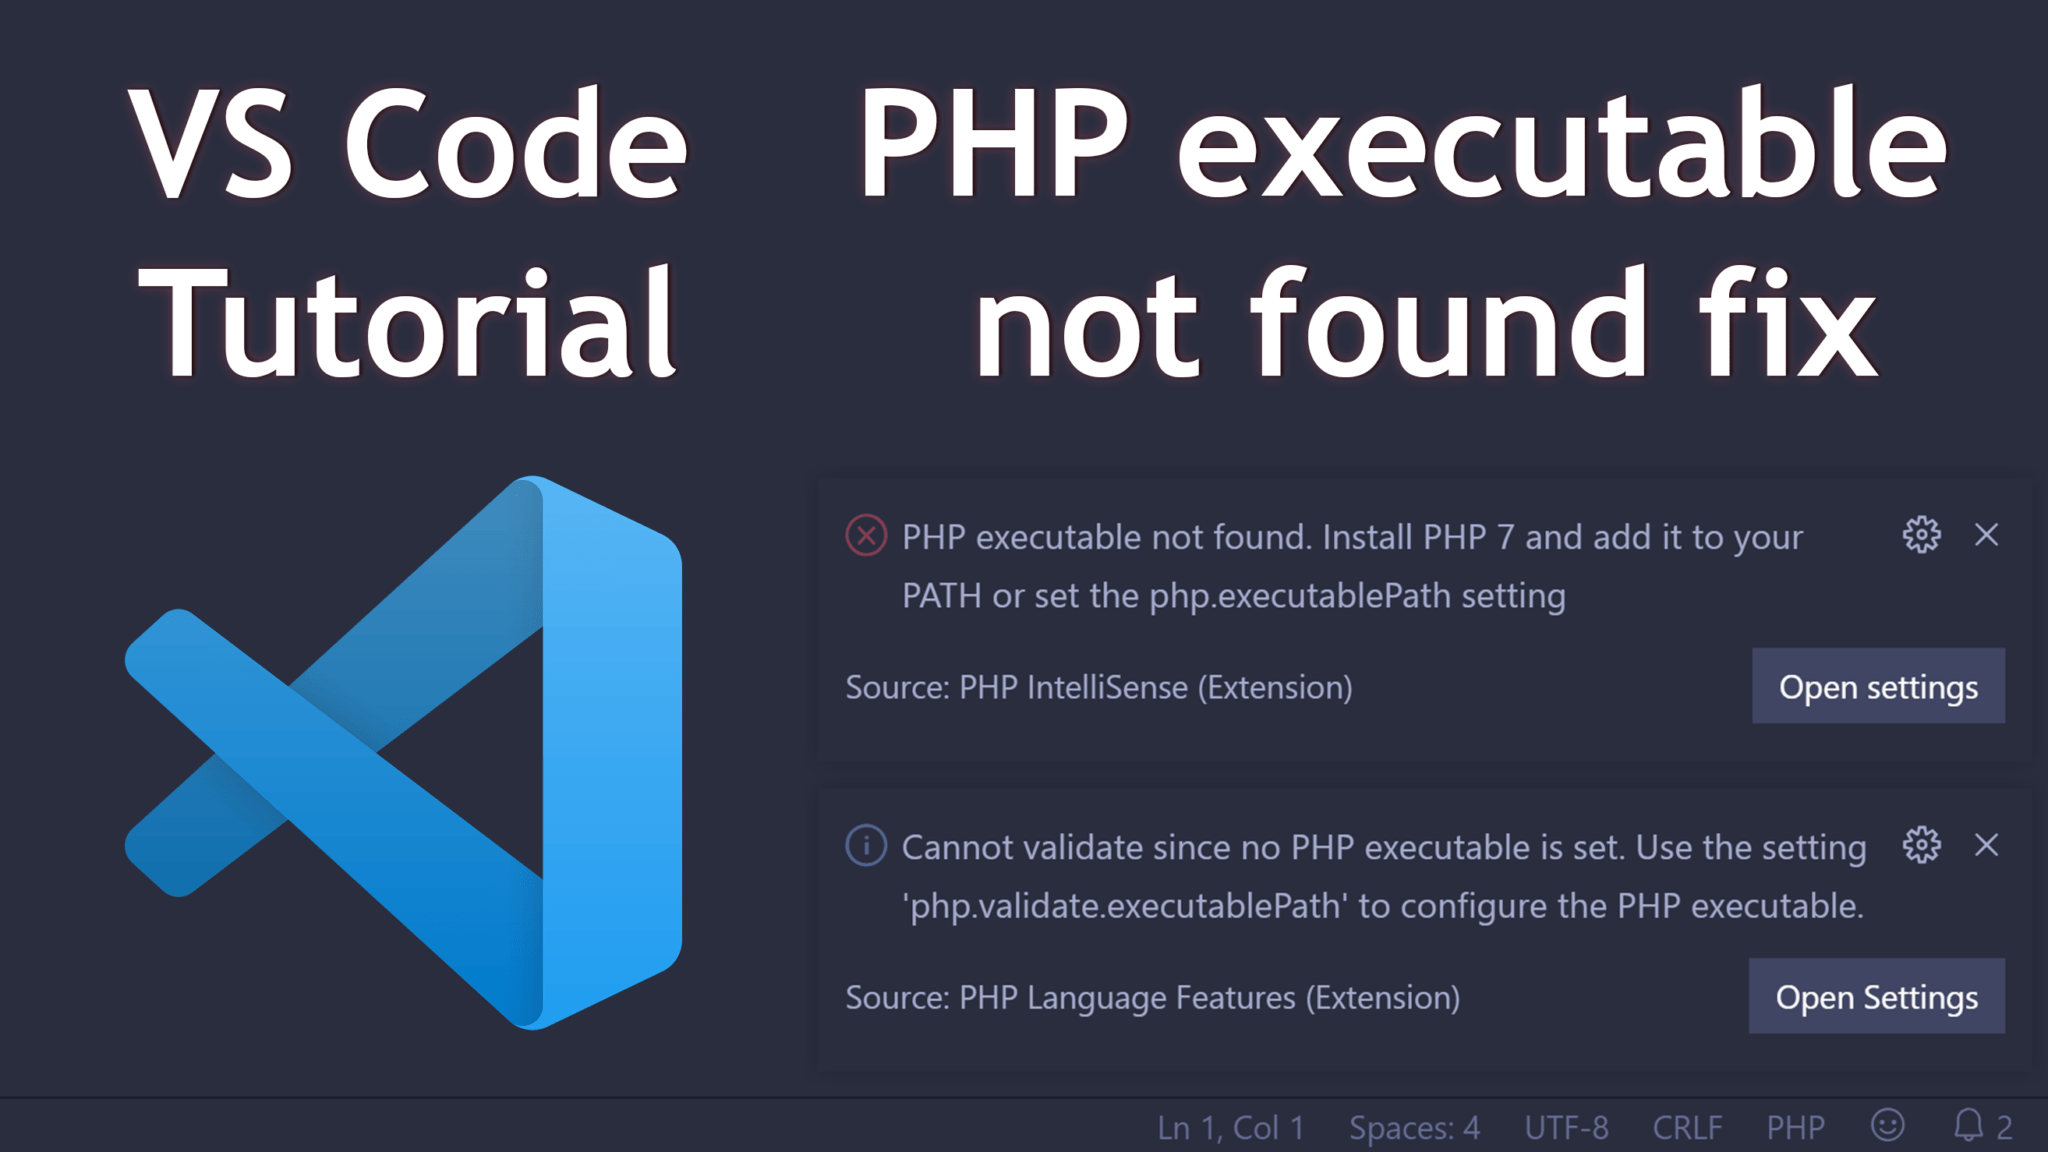 Fix "PHP executable not found" error in VS Code